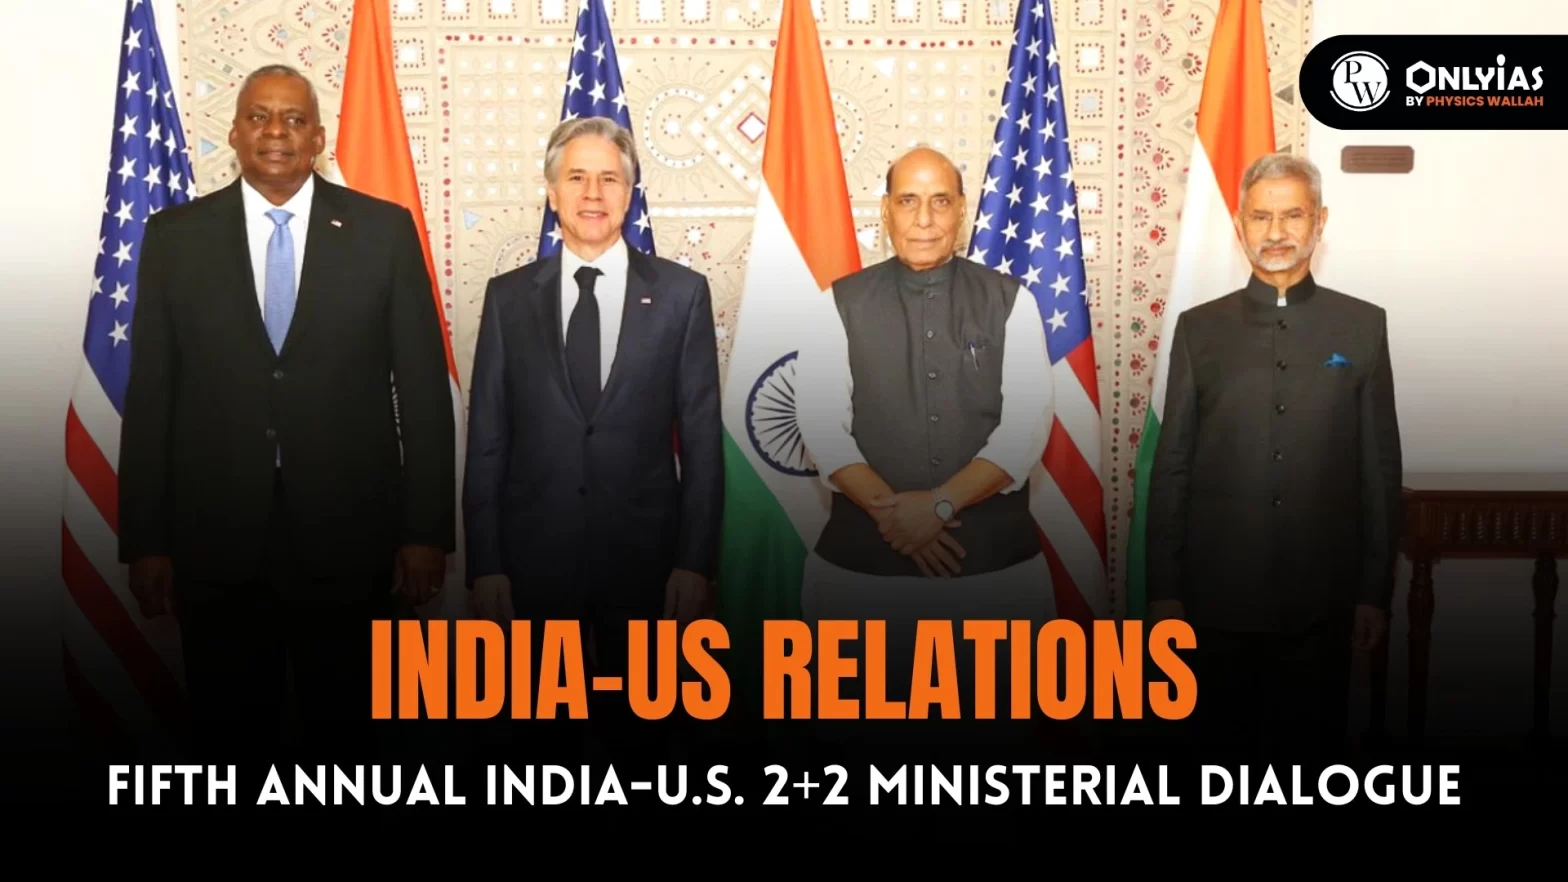 India-US Relations: Fifth Annual India-U.S. 2+2 Ministerial Dialogue